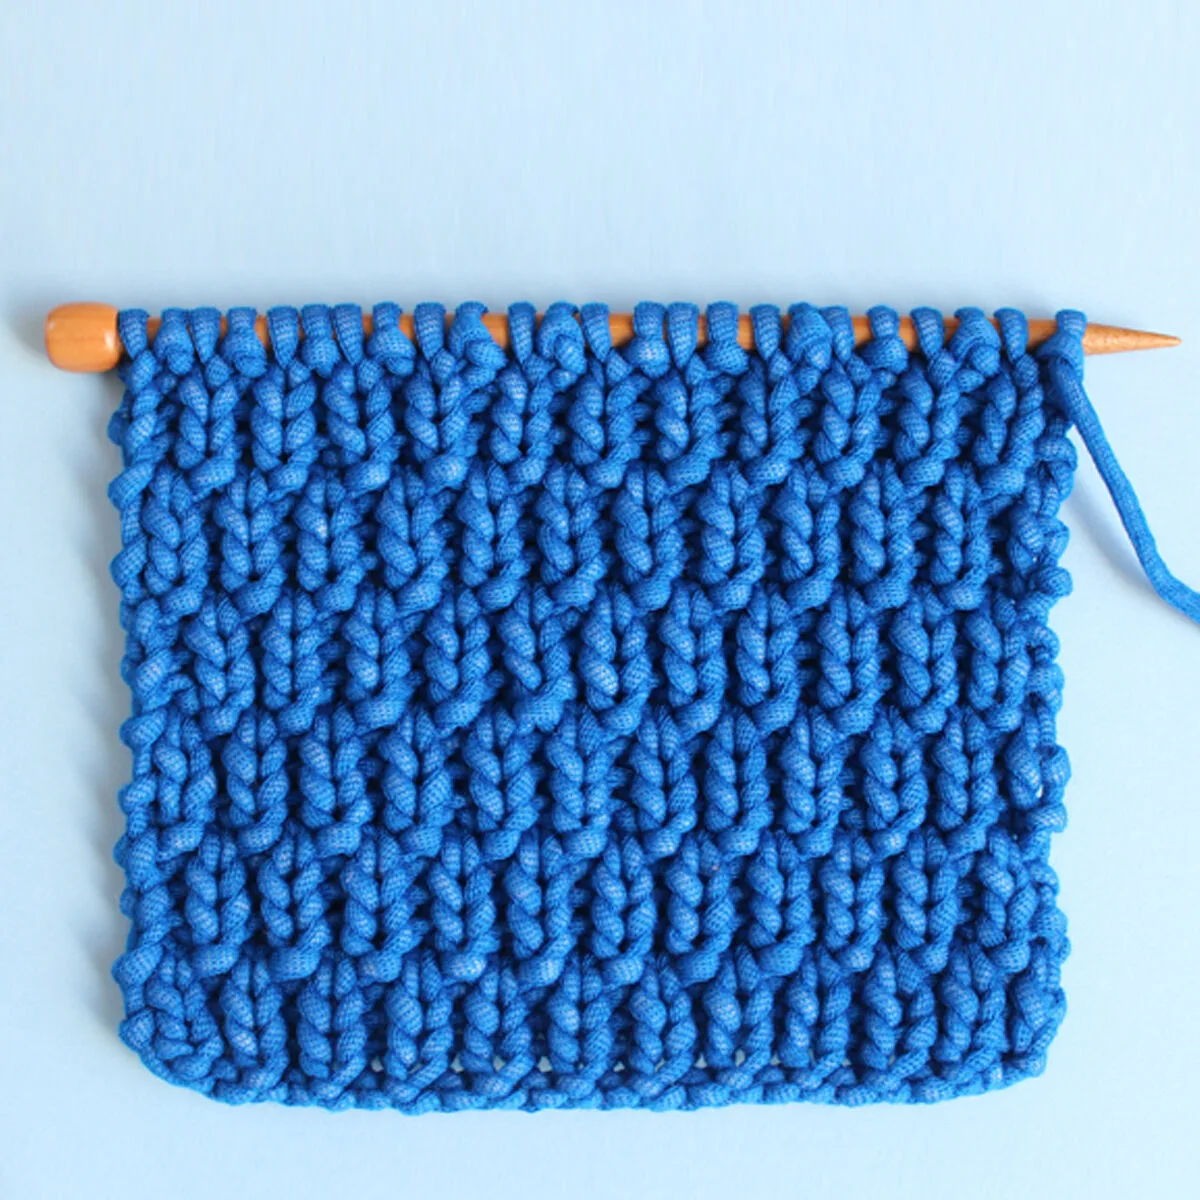 Long Raindrops Knit Stitch Pattern in bright blue yarn color on knitting needle atop a light blue background.